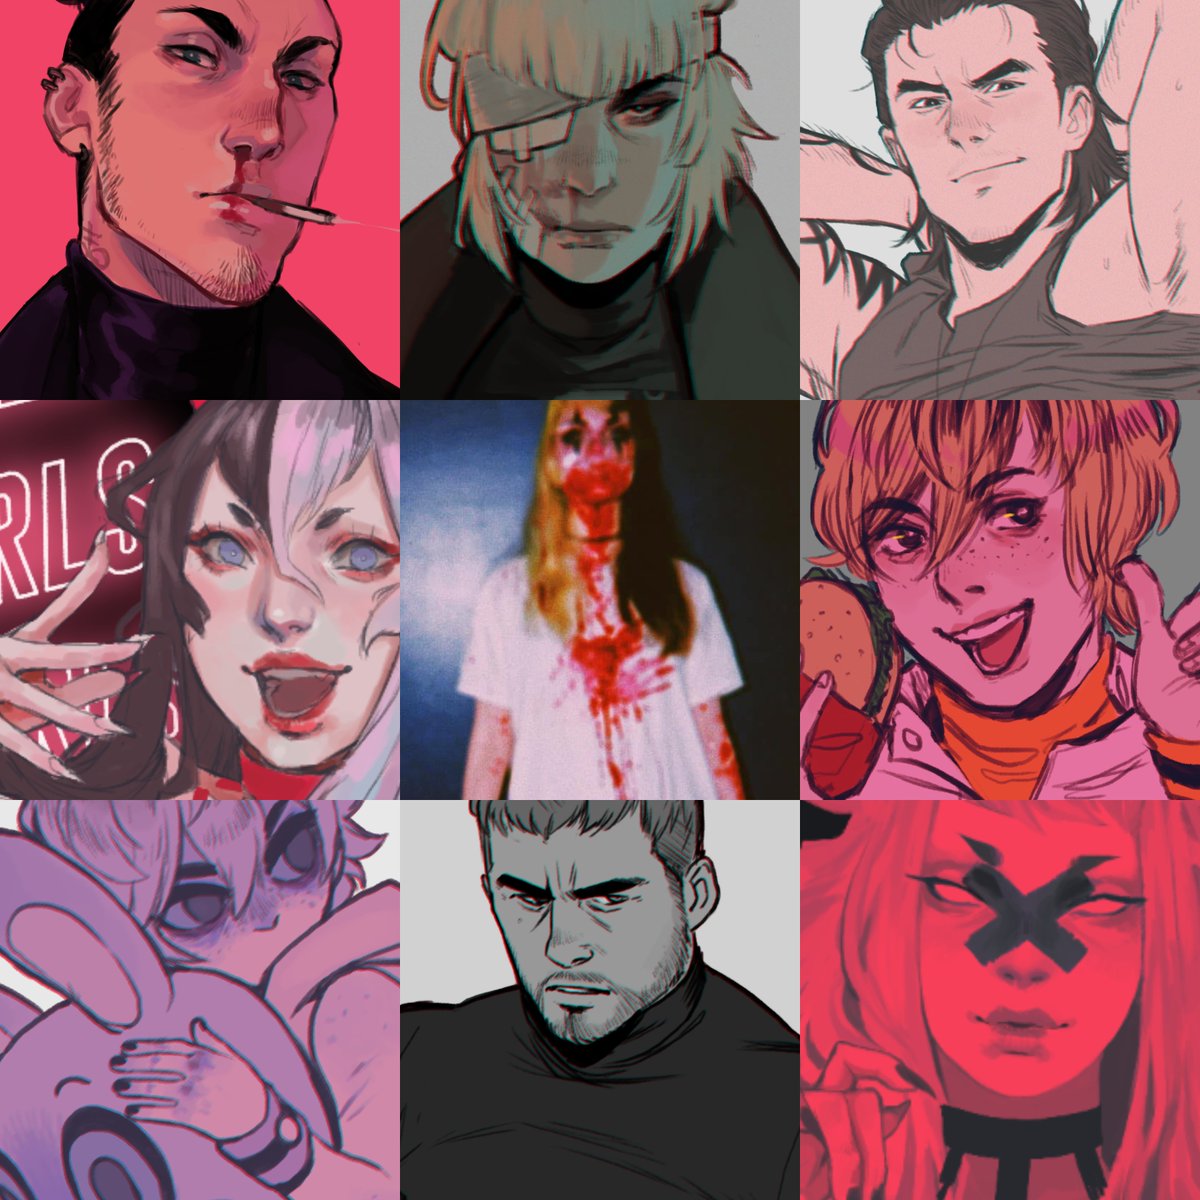 #artvsartist2021 i hardly finished anything this year 😔but i did get more evil and sexier 😳😈 